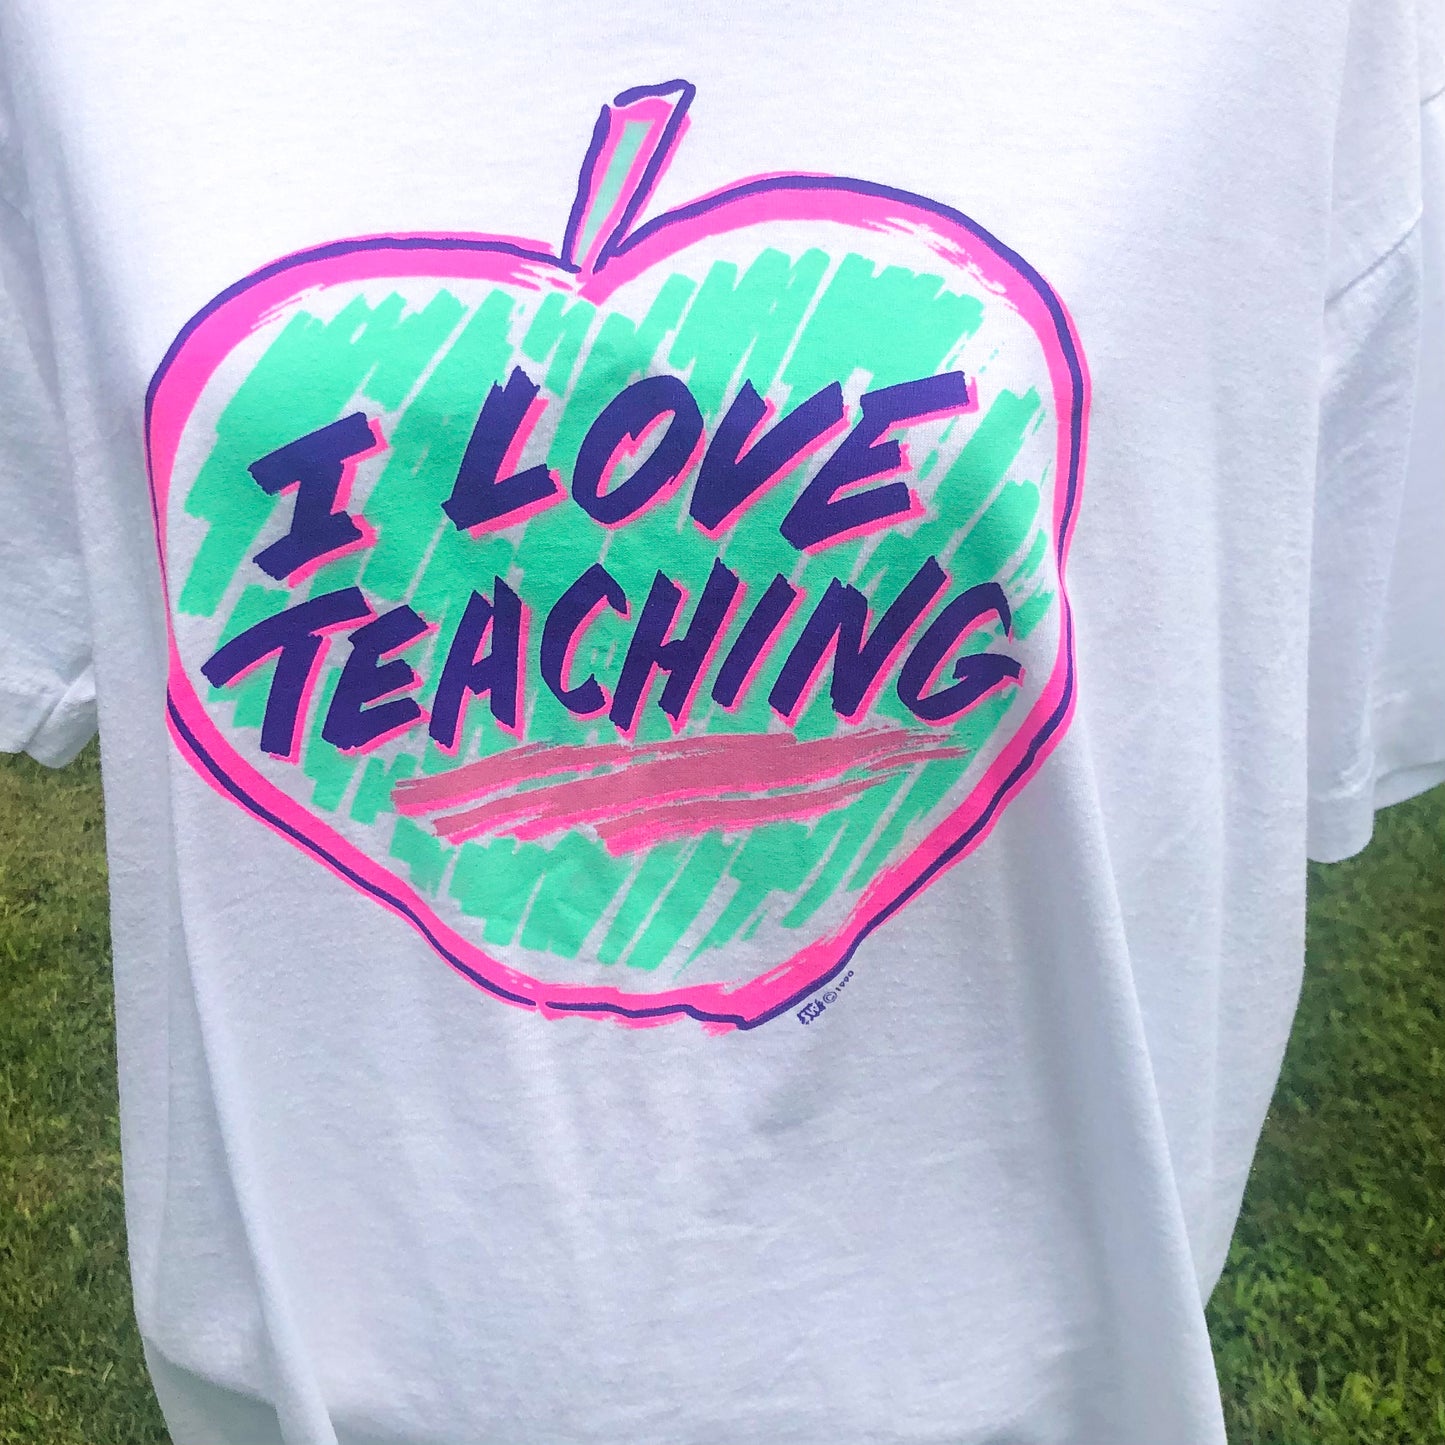 1990 Vintage “I Love Teaching” T-Shirt | Made in USA